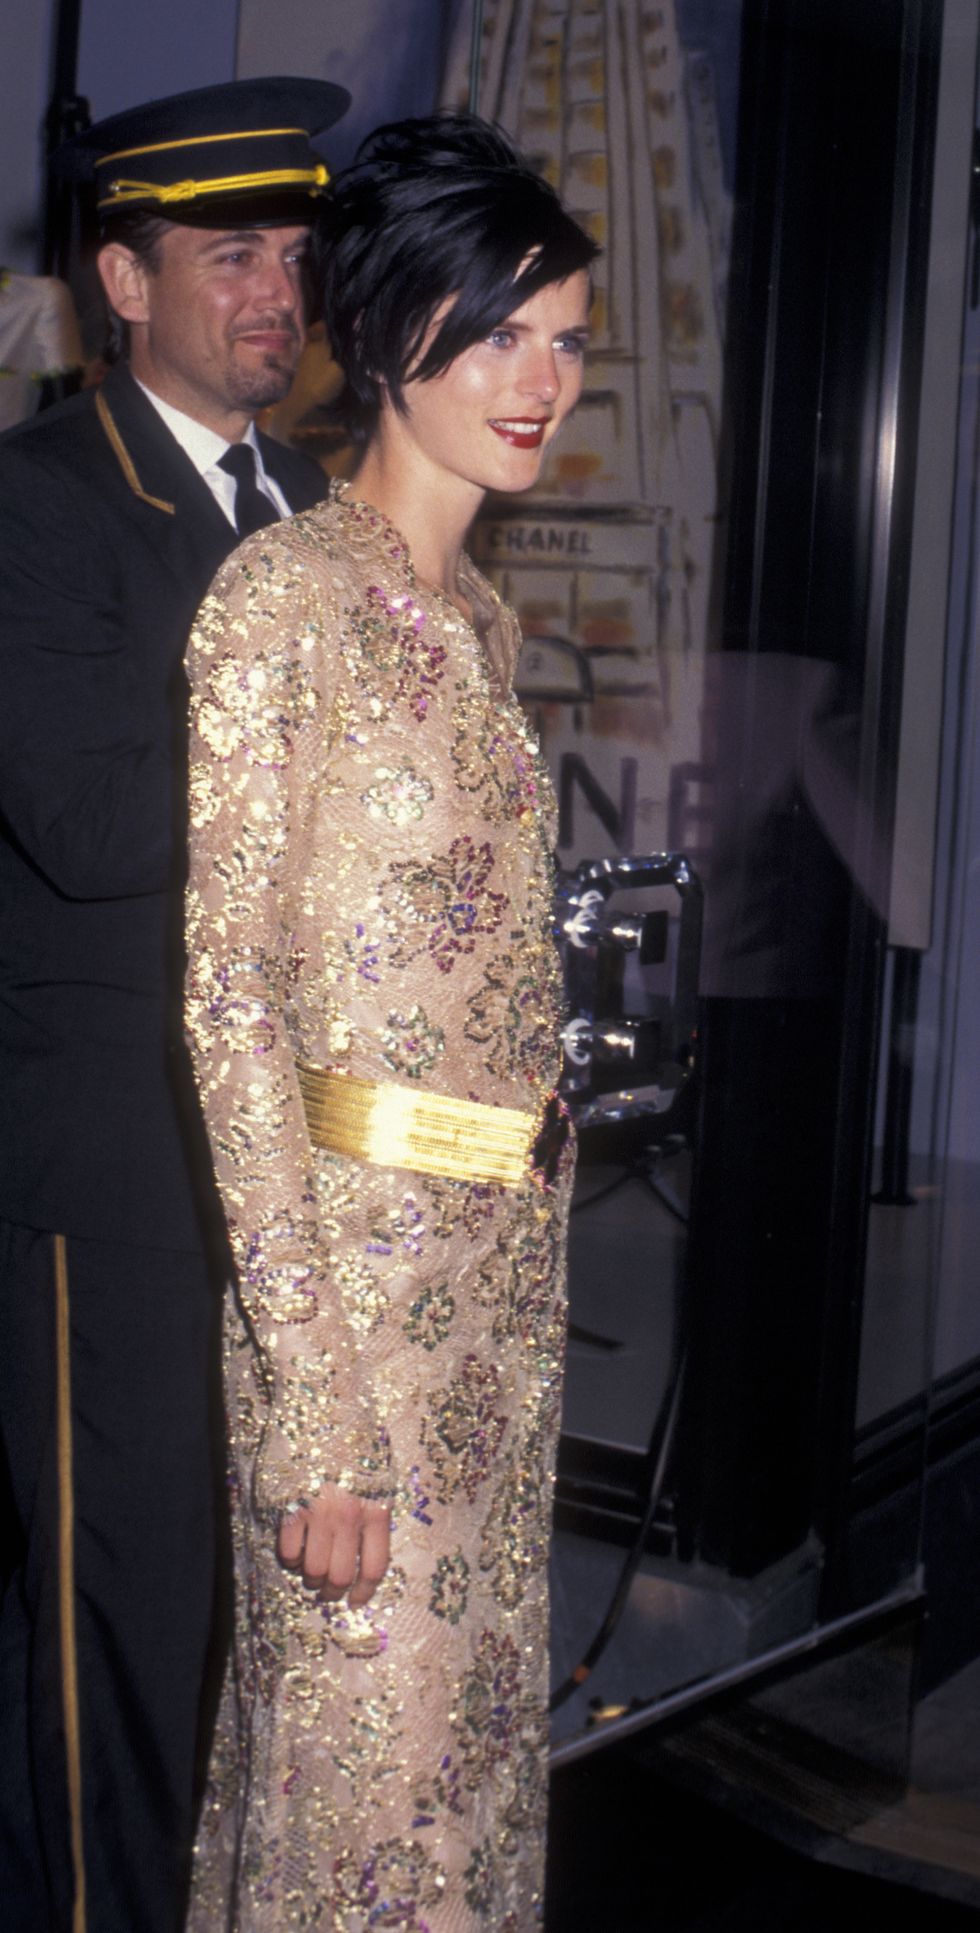 new york city   may 30  stella tennant attends grand opening of chanel flagship boutique on may 30, 1996 in new york city photo by ron galellaron galella collection via getty images